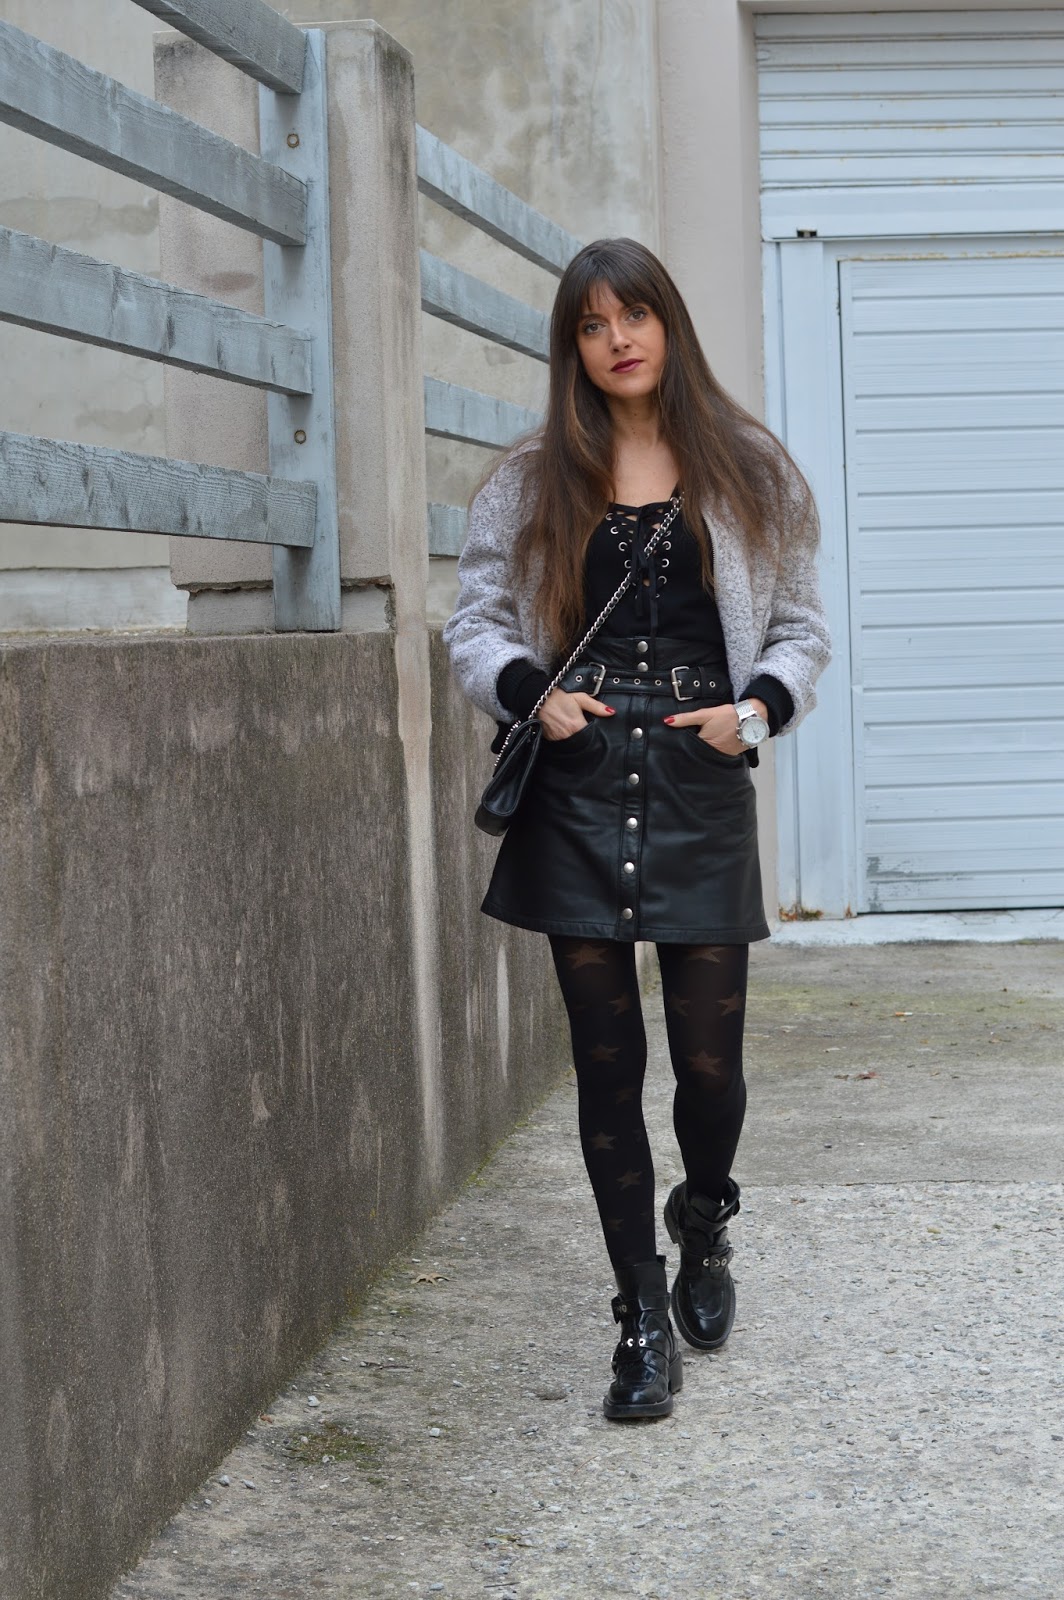 Fashion Musings Diary: The Kooples and Balenciaga: My Sporty Chic Meets ...